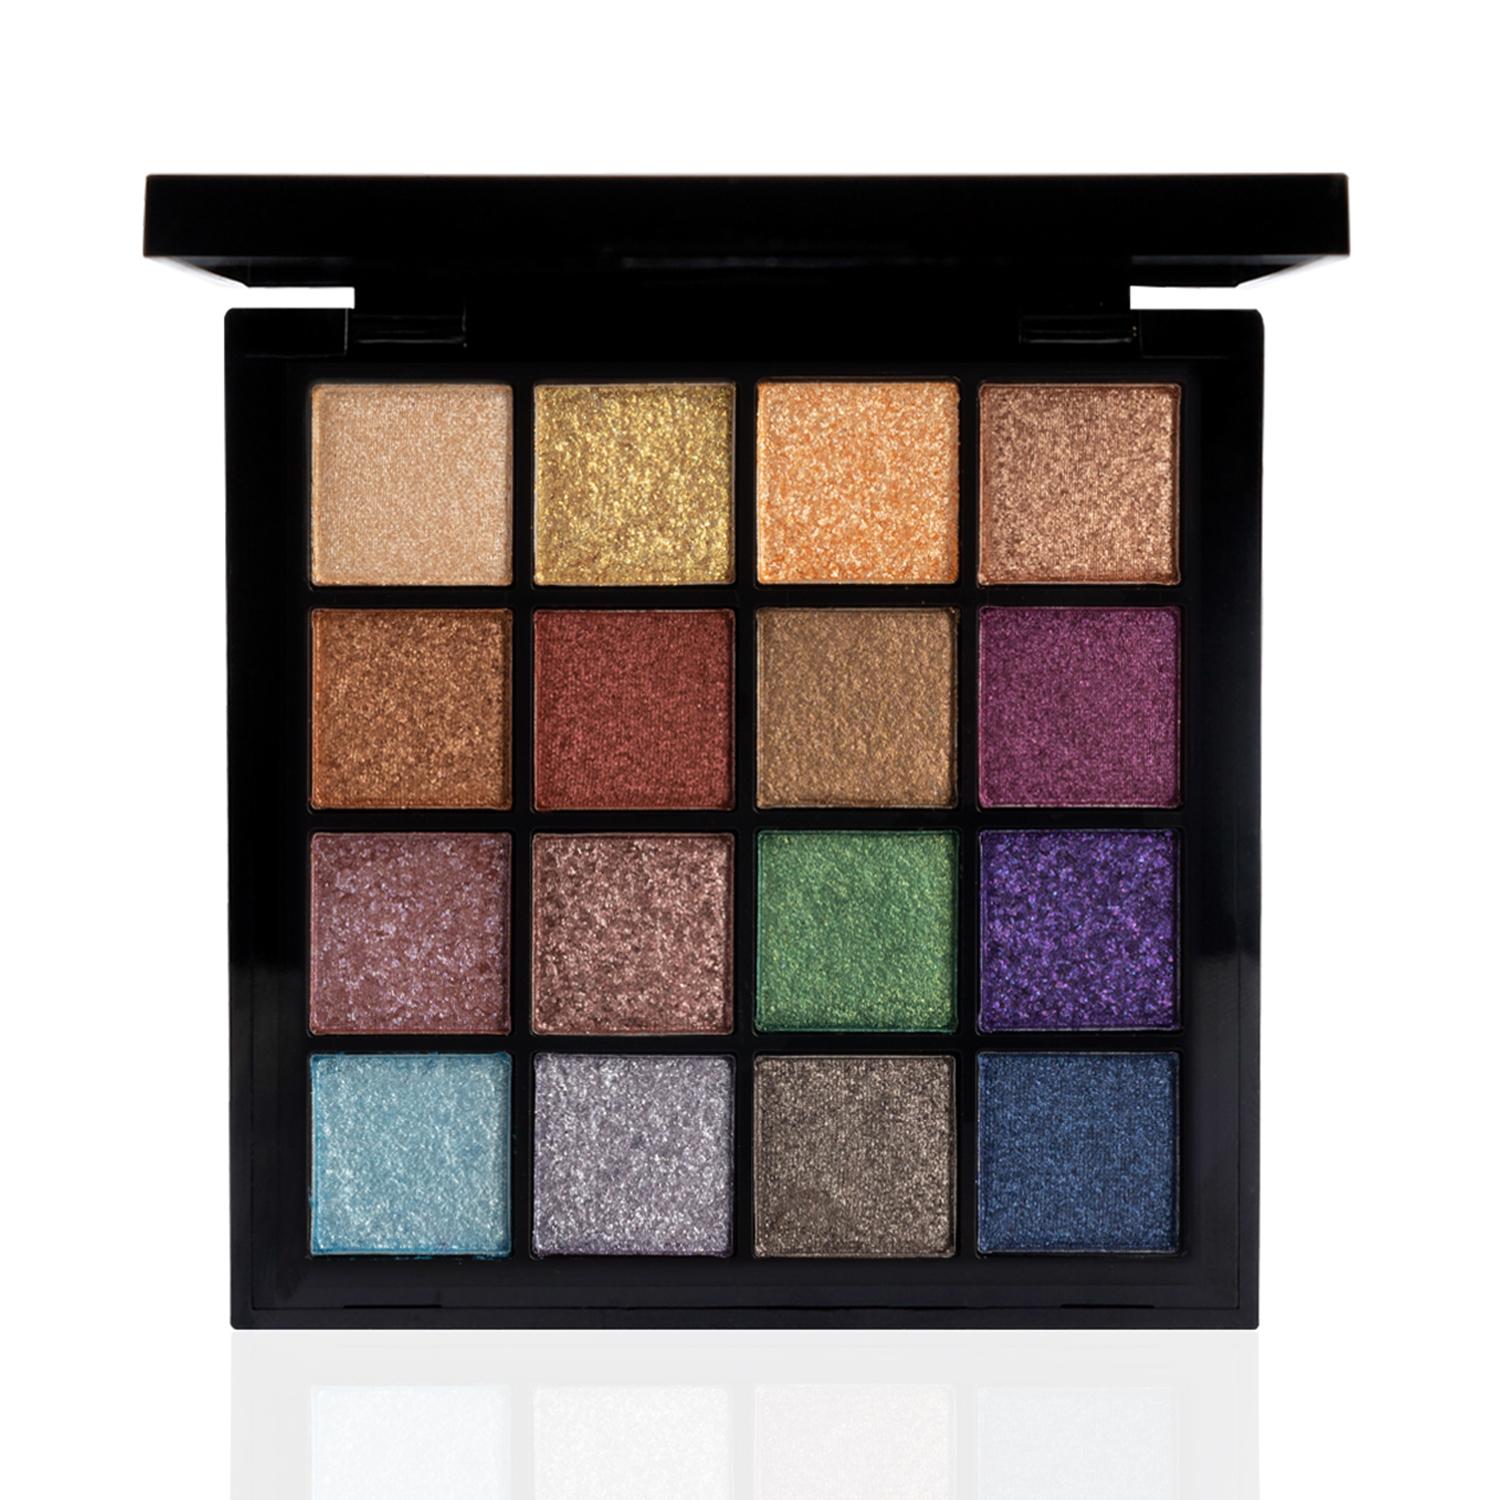 PAC | PAC Shimmer Eyeshadow Palette - X16 Uptown Bling (1g)